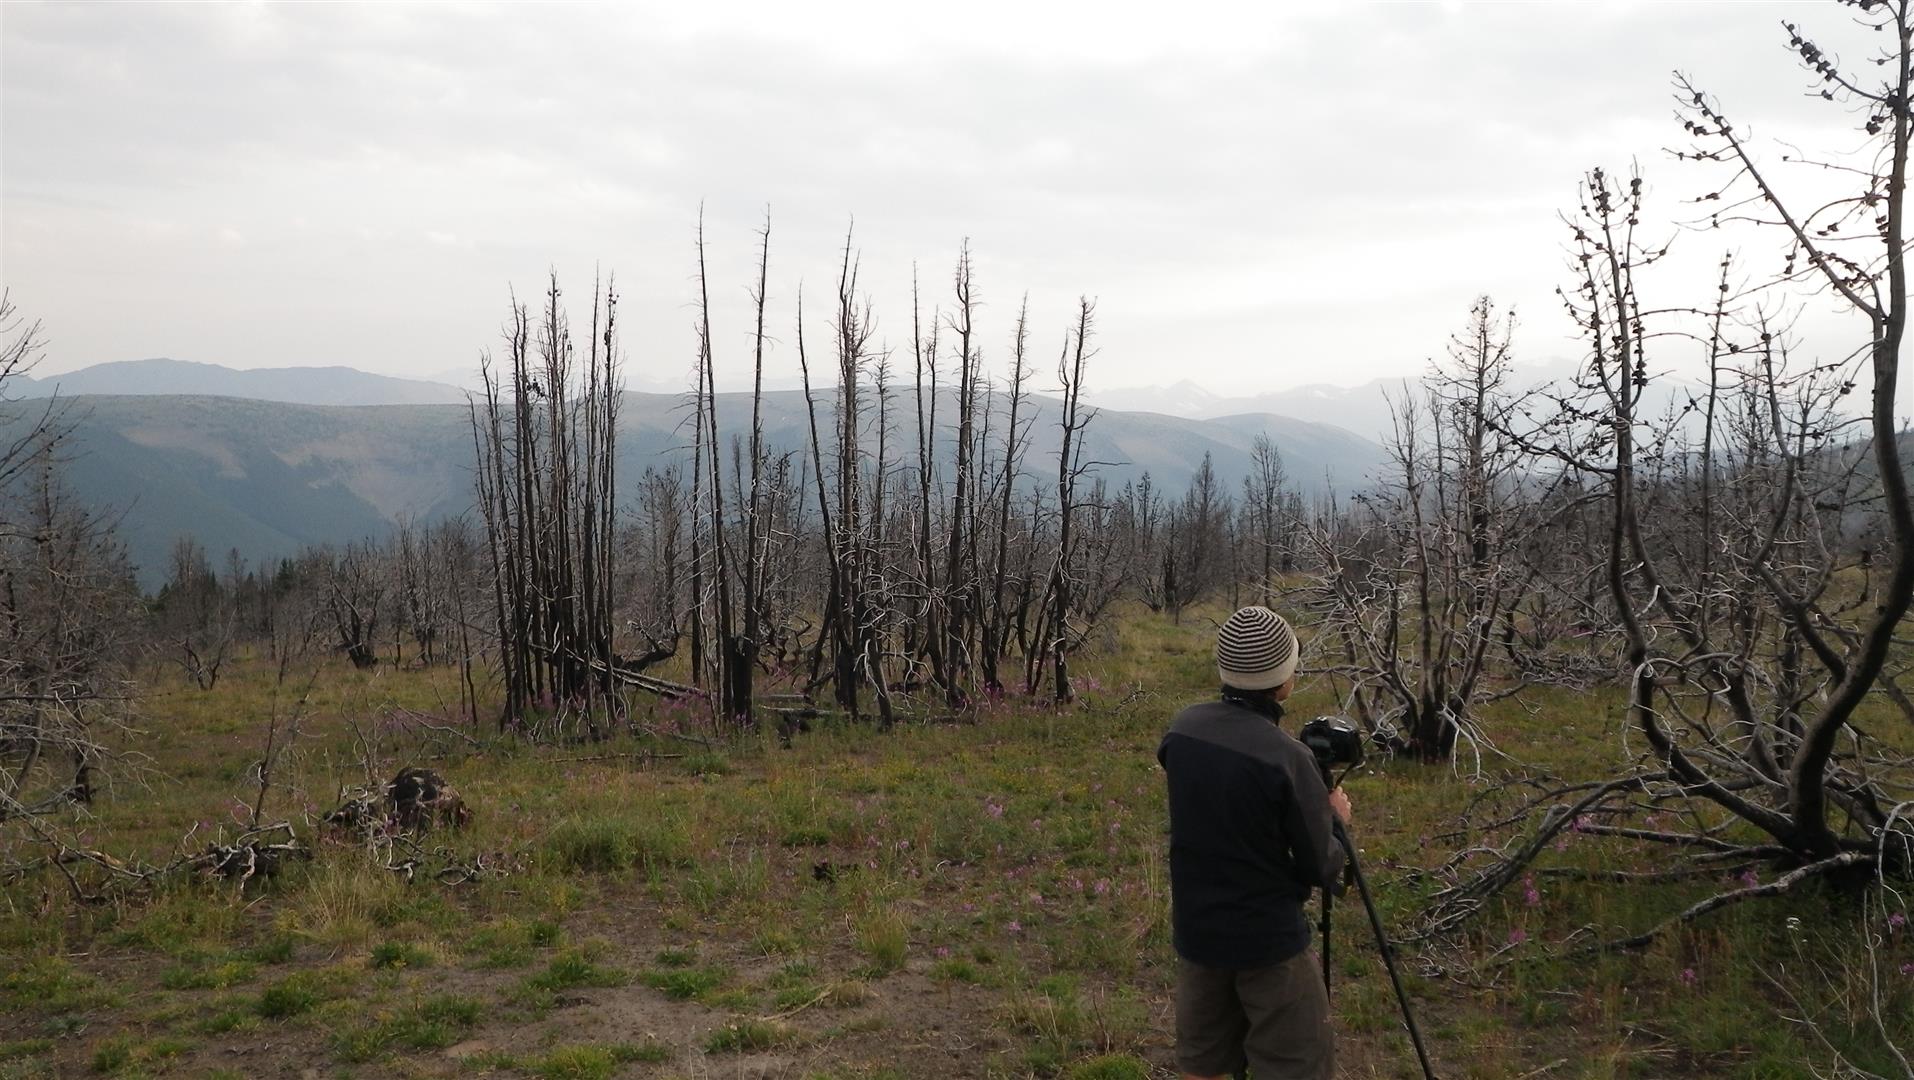 FOREST FIRE DAMAGE